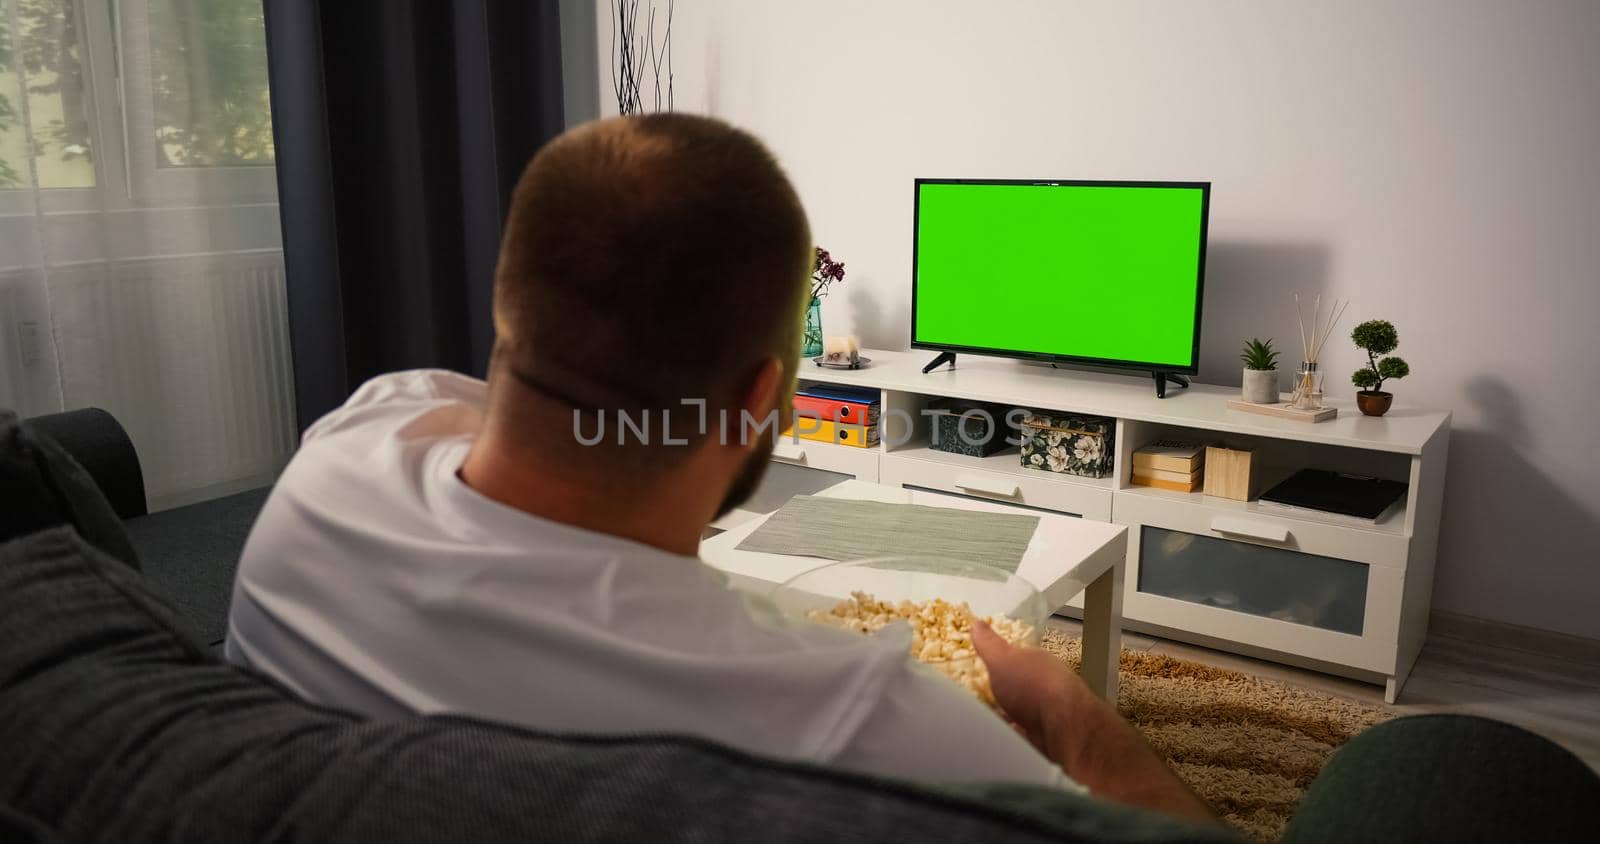 Man Watching Television with Green Screen Chroma Key, shot behind models shoulders. Man Eating Popcorn Relaxing Sitting on a Couch Home looking to TV.